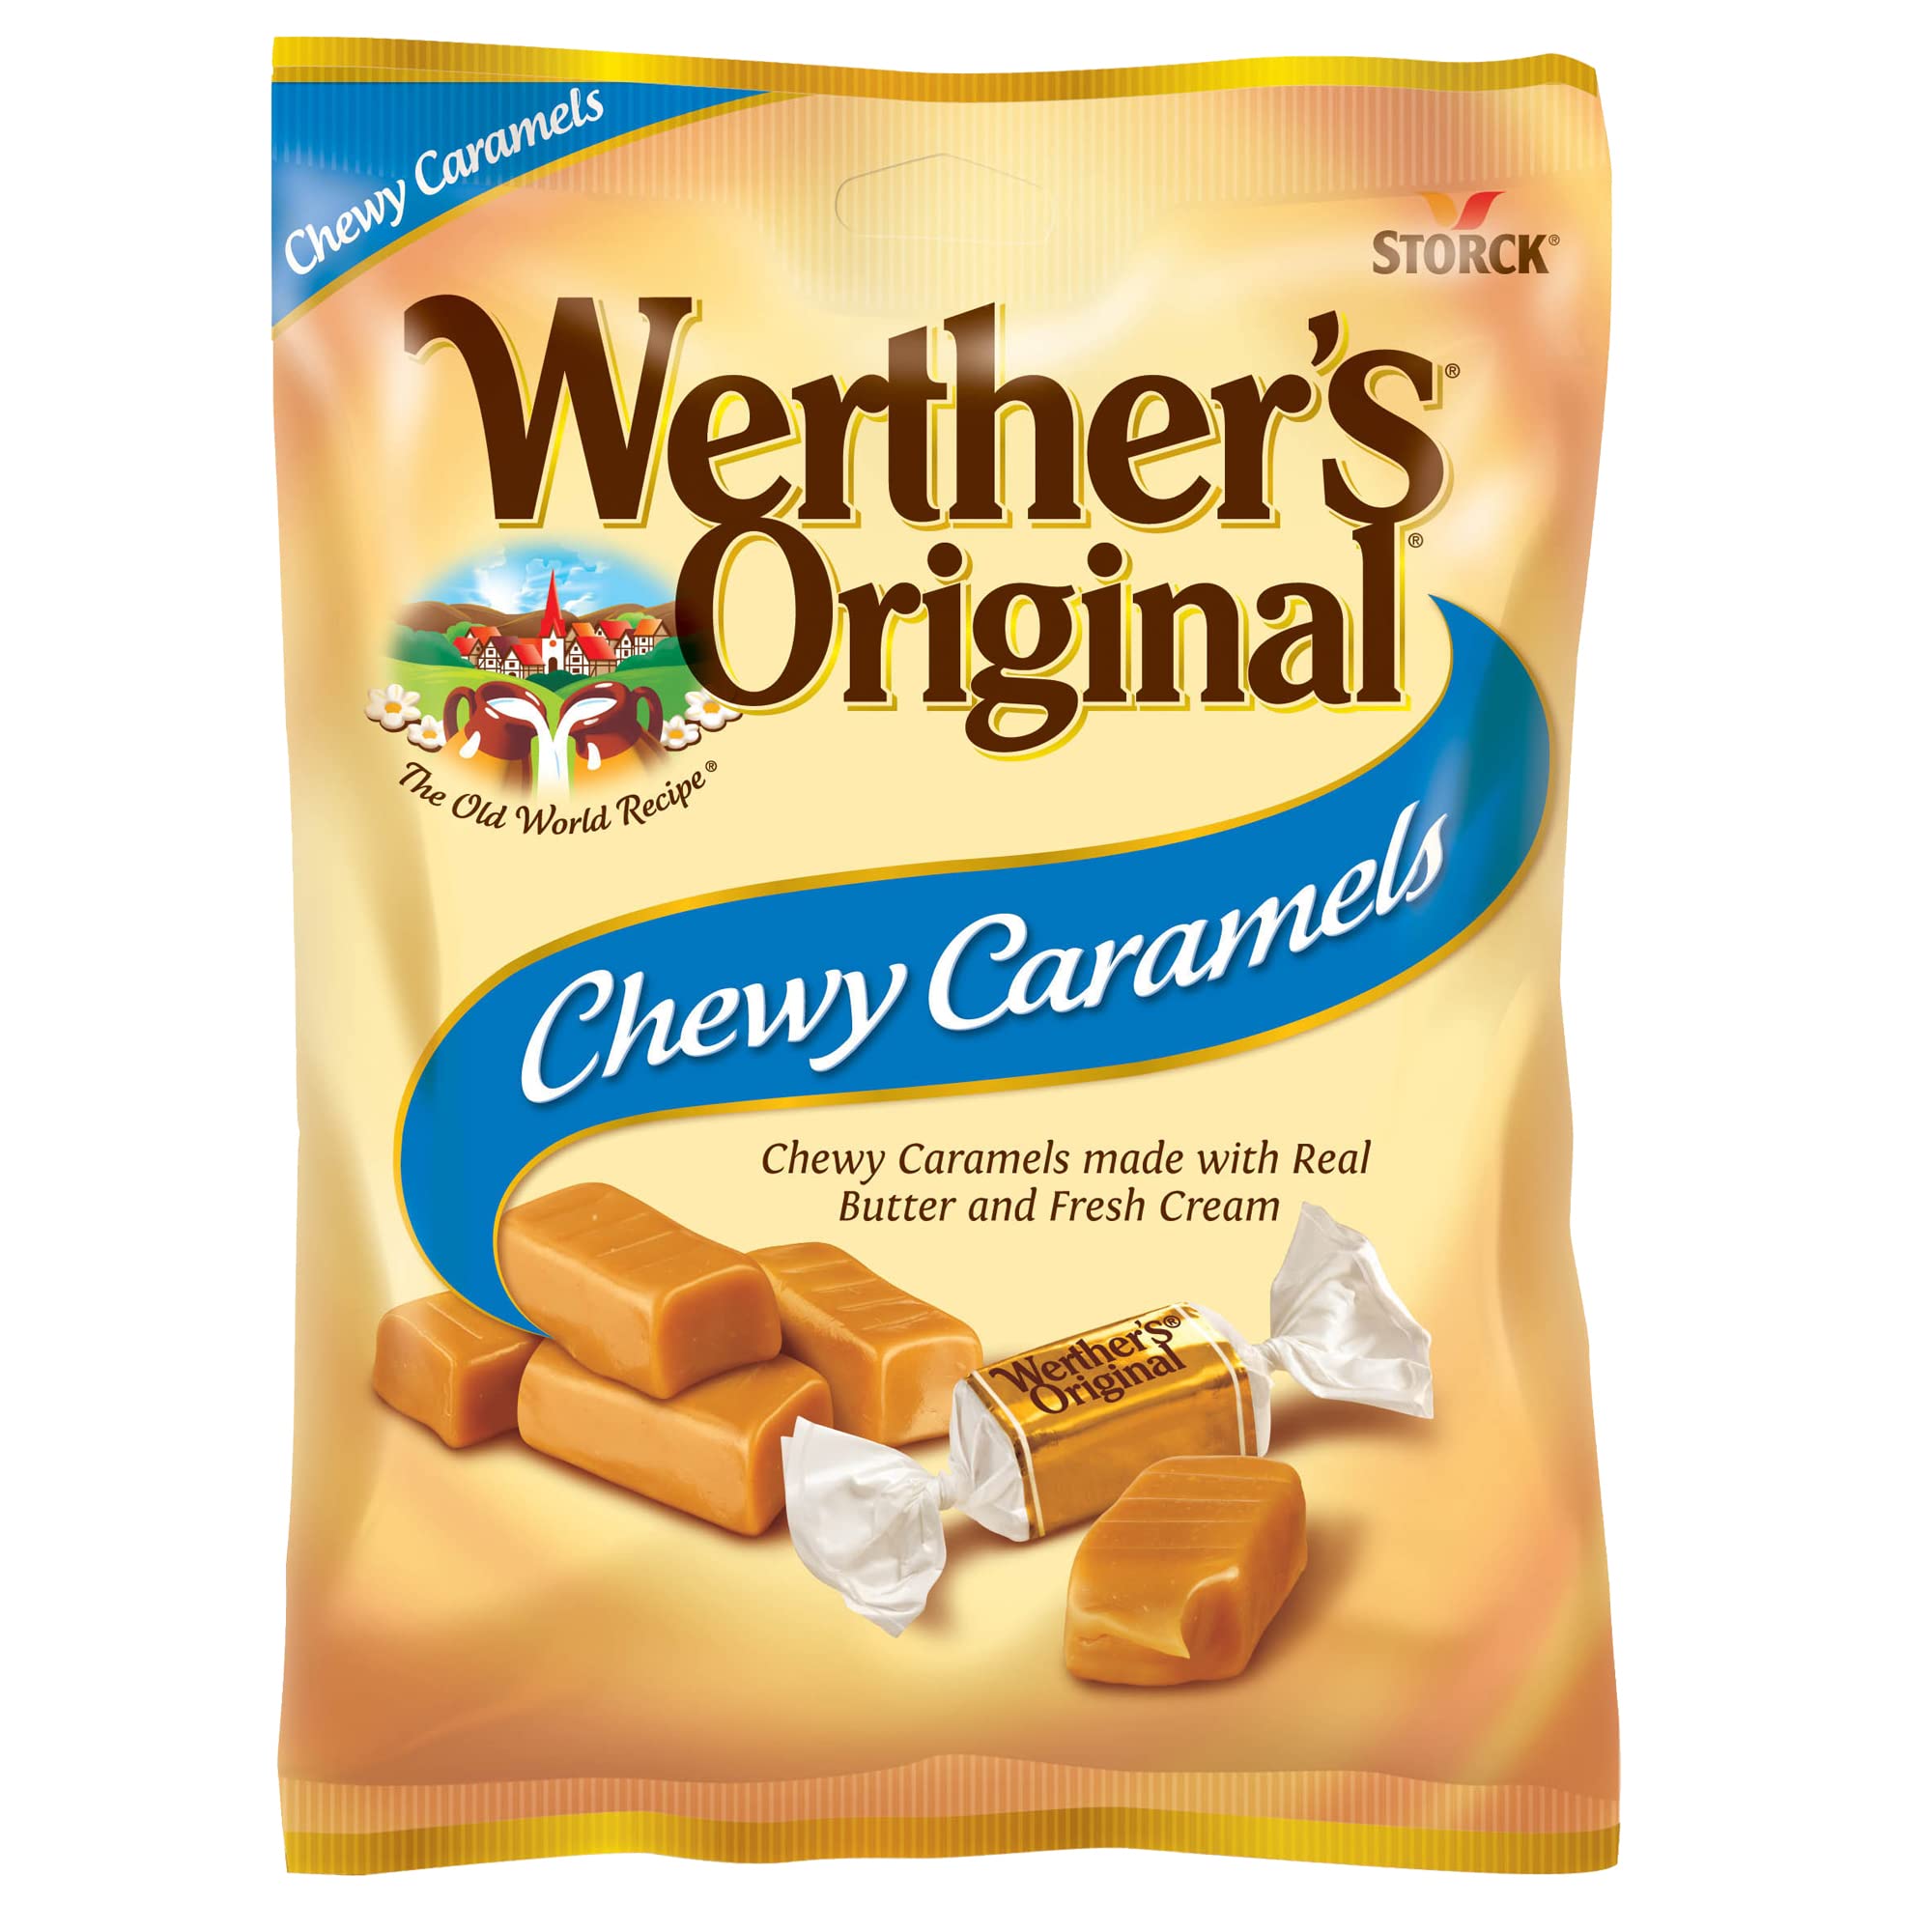 ''Werther's Original Chewy Caramel CANDY, 2.4 Oz Bags (Pack of 12)''